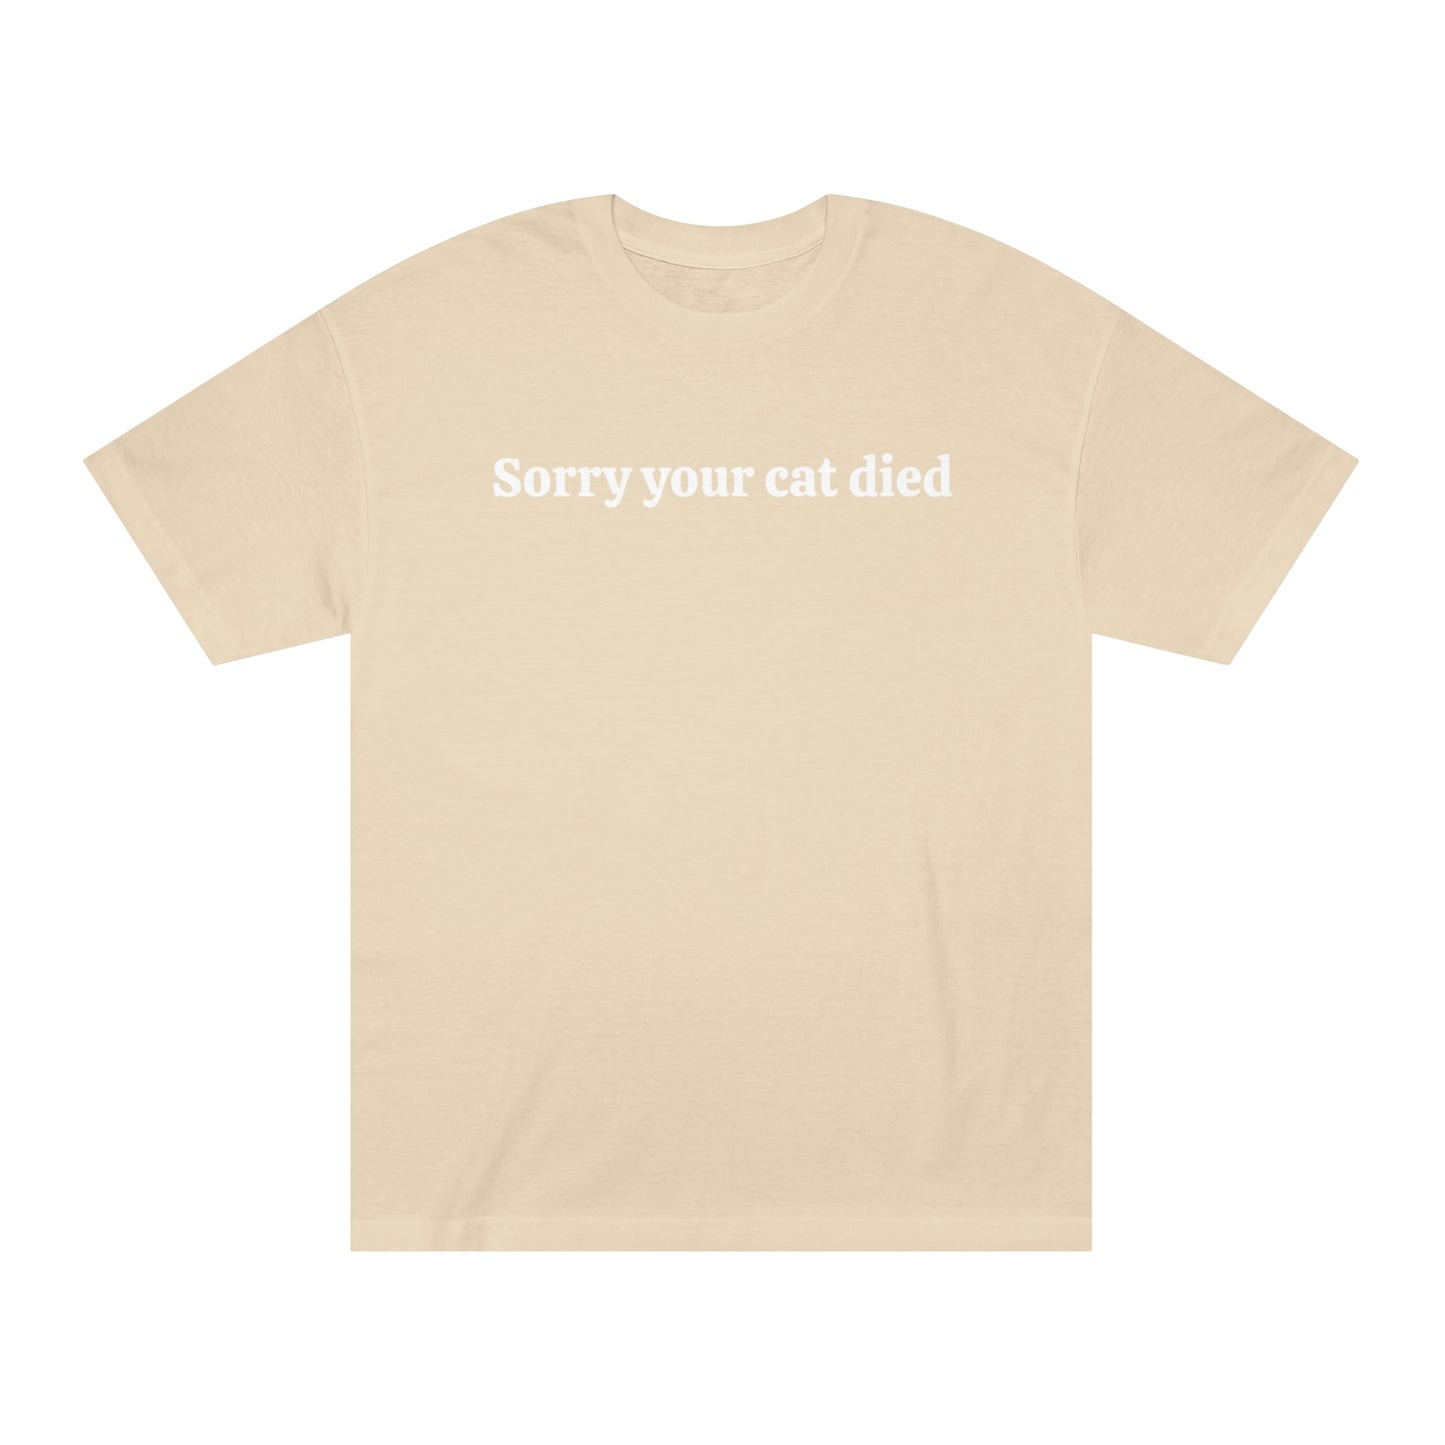 Sorry your cat died